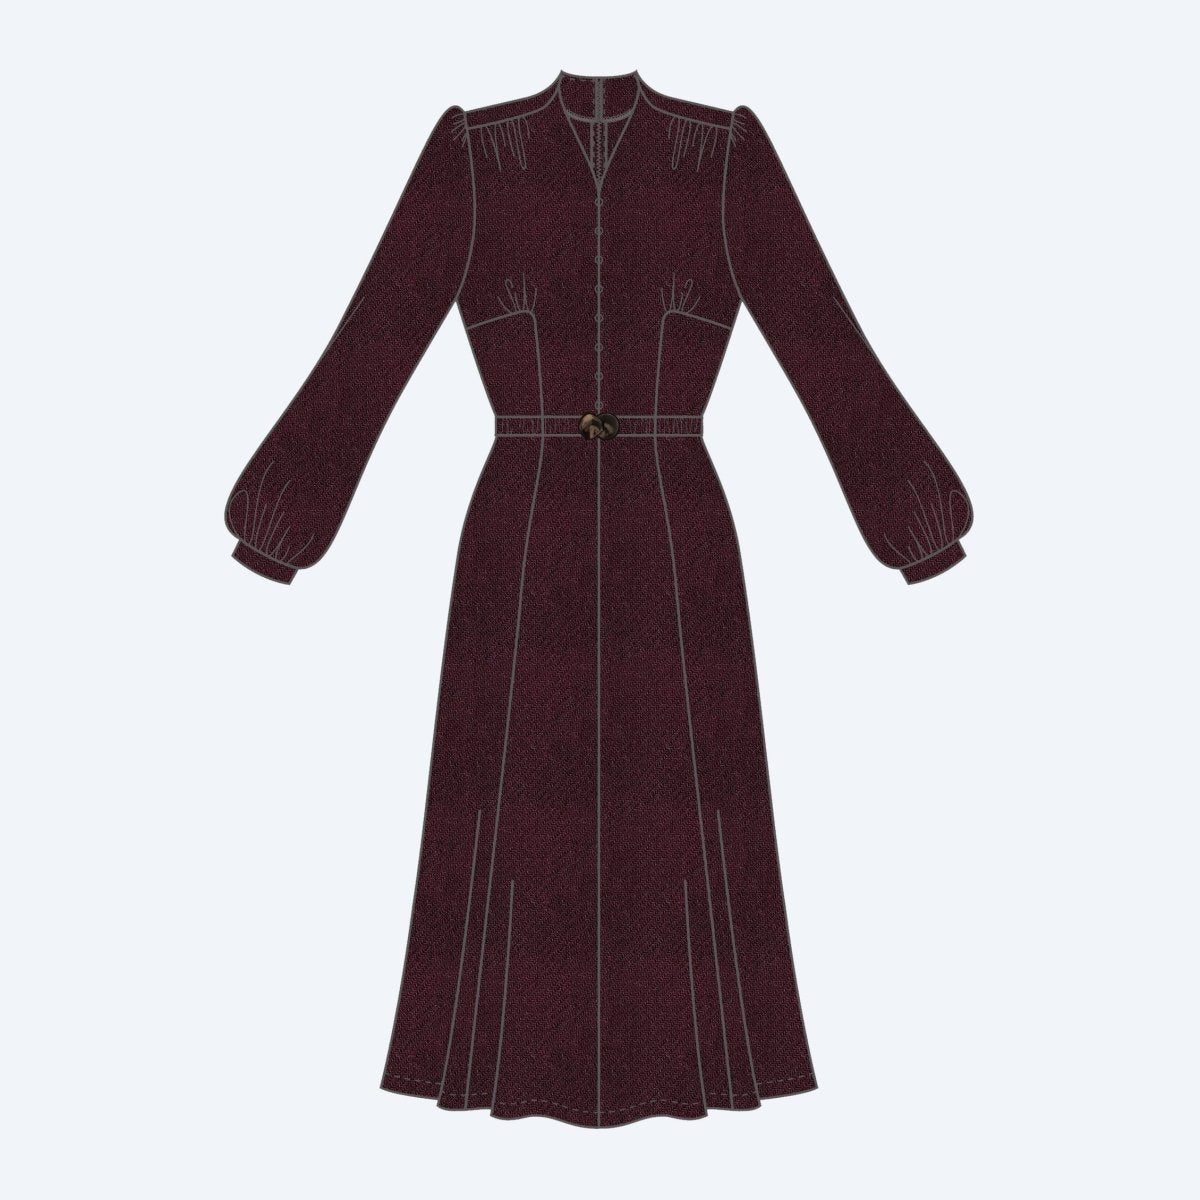 Long sleeved vintage inspired dress - Midwinter Midi Dress by Emmy Design Sweden in aubergine line drawing